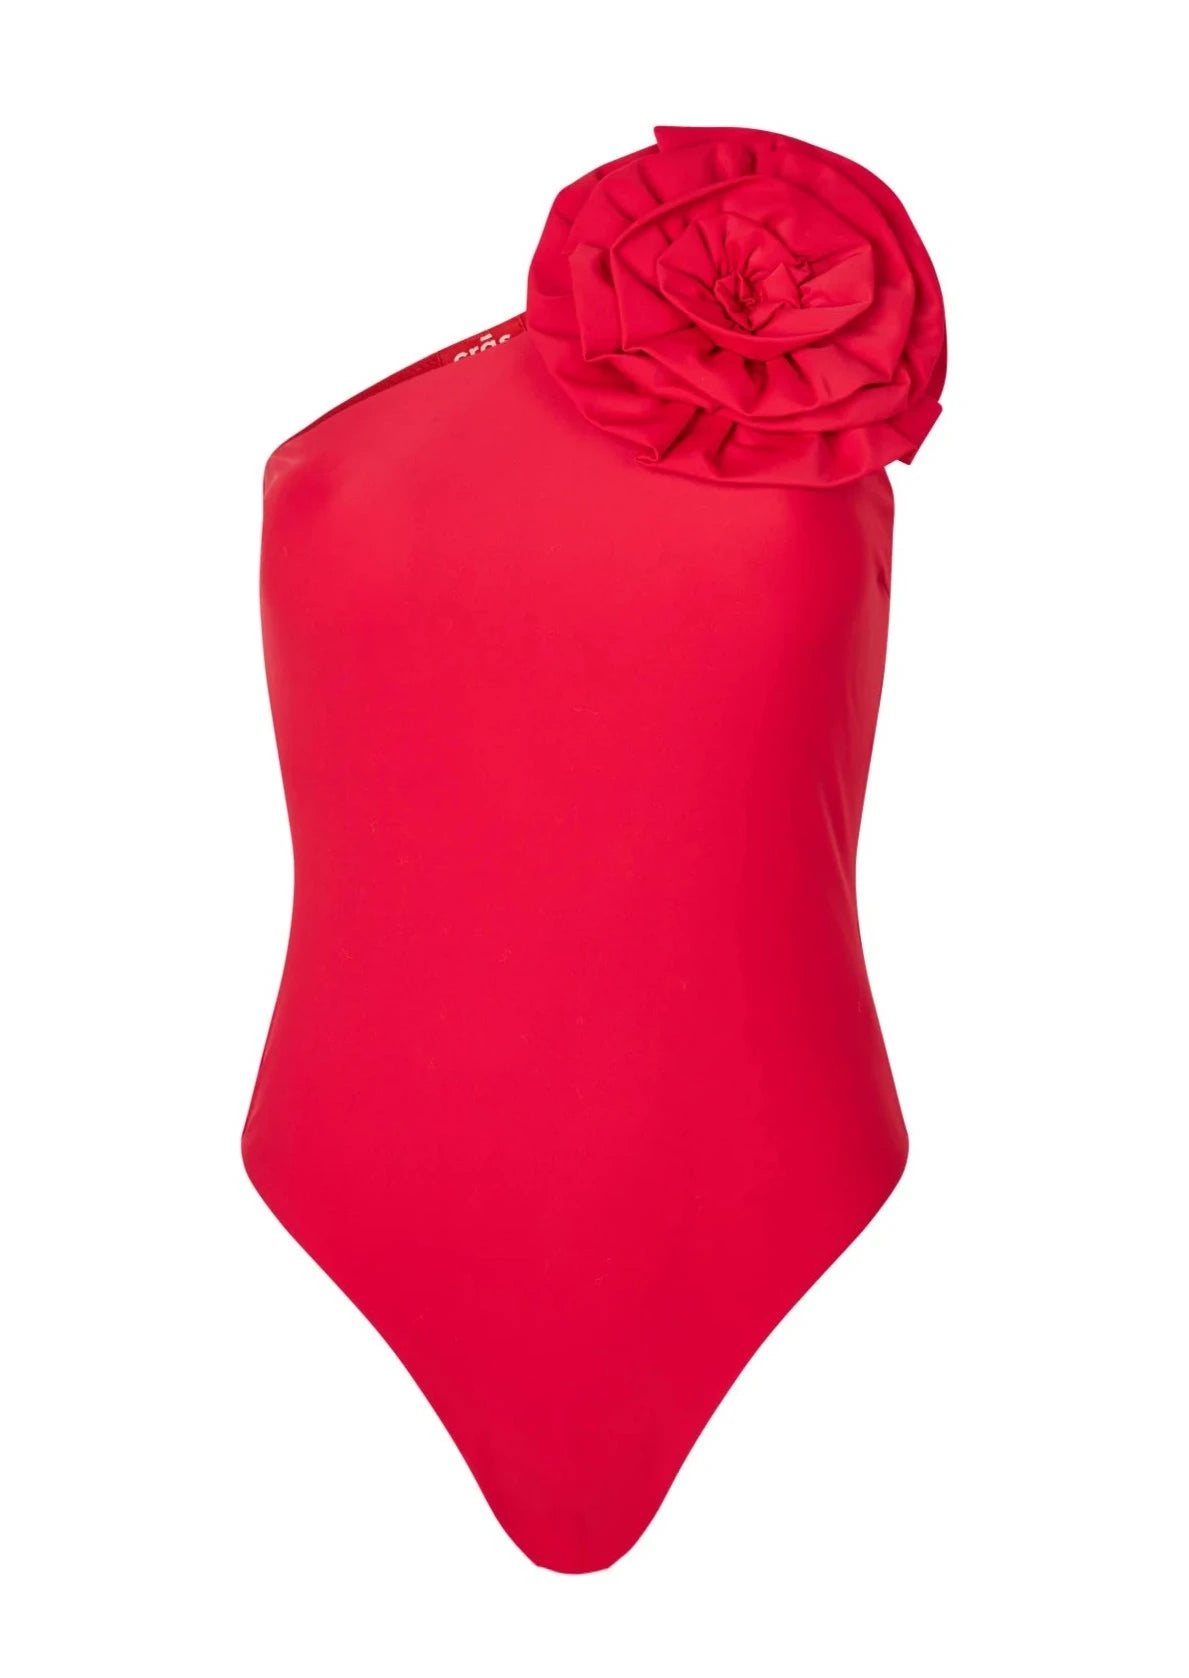 CRAS CARRIE ROSE SWIMSUIT